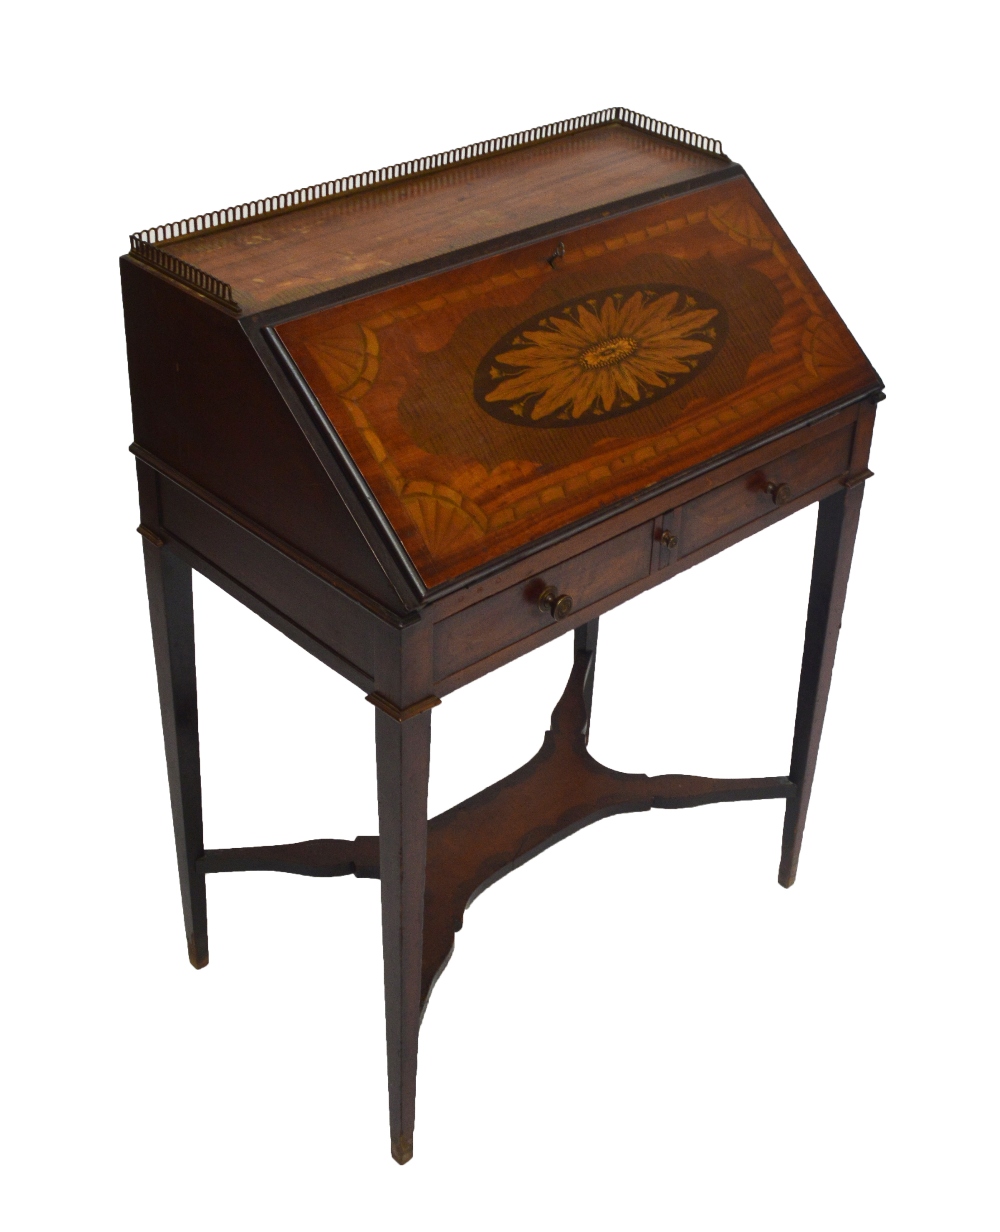 An Edwardian satinwood and inlaid lady's bureau with pierced brass galleried top and floral